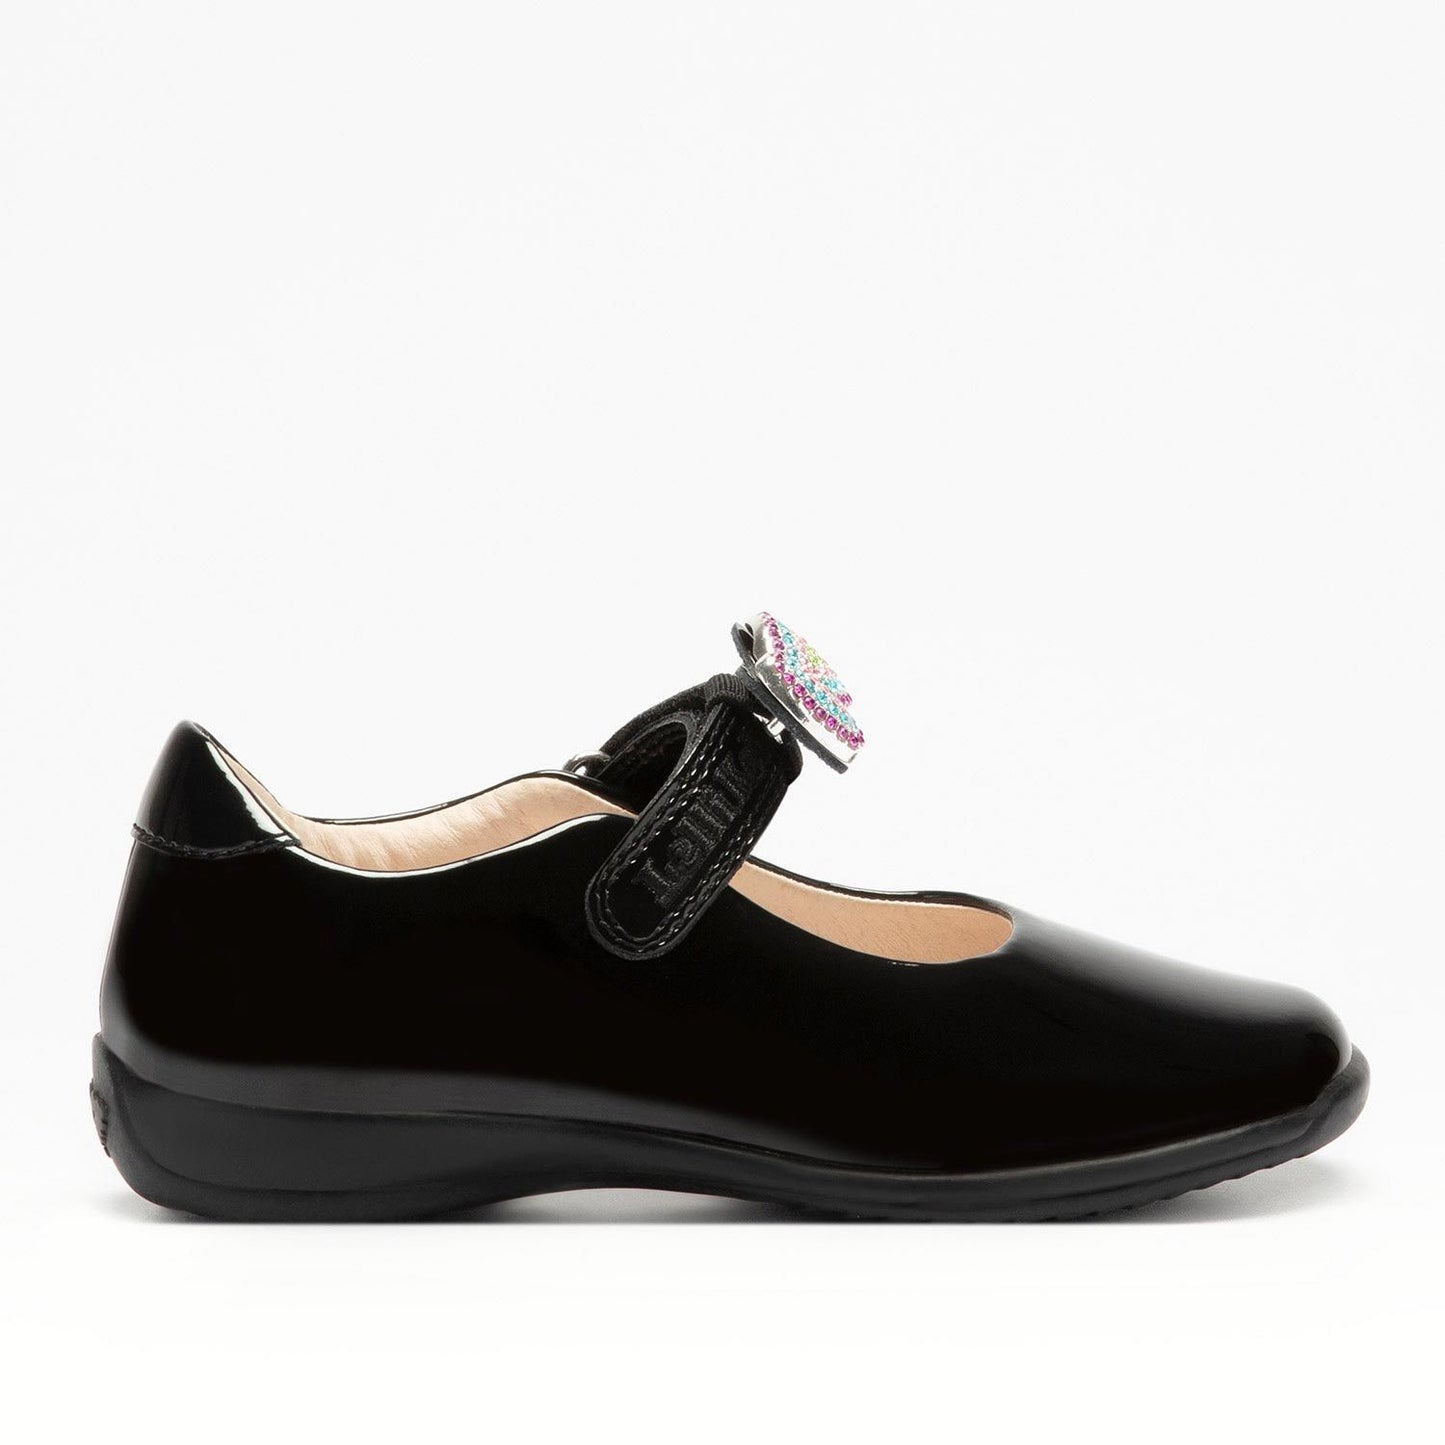 A girls Mary Jane school shoe by Lelli Kelly, style LK8116 Erin, in black patent leather with velcro fastening and detachable multicoloured bow. Right side view.